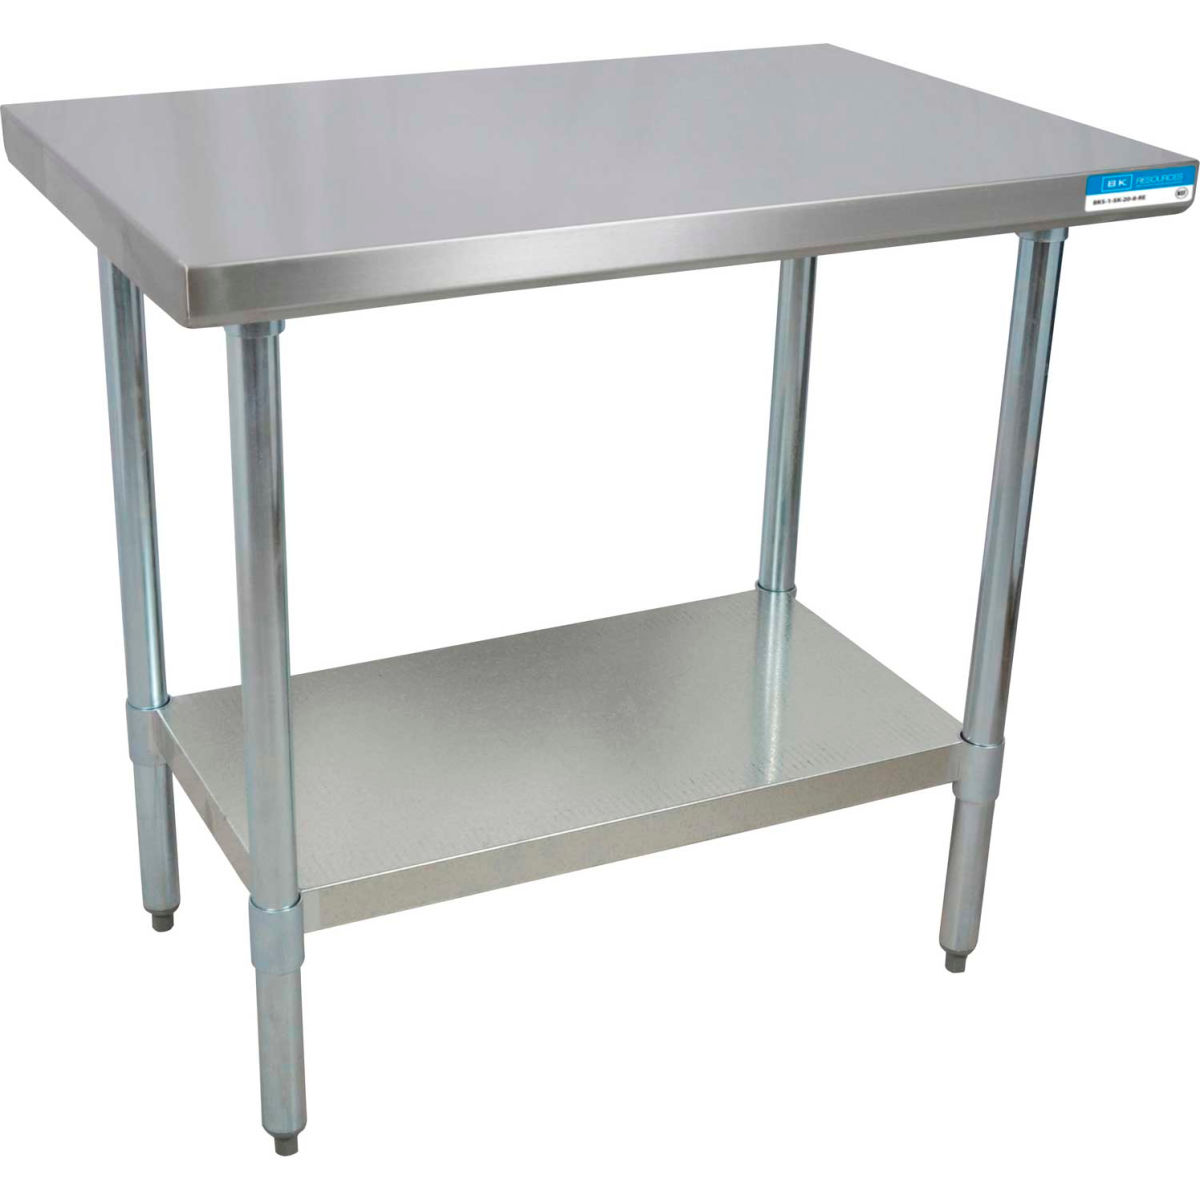 Picture of BK Resources B1516223 18 Gauge 430 Series Stainless & Galvanised Shelf Workbench with Undershelf - 30 x 18 in.